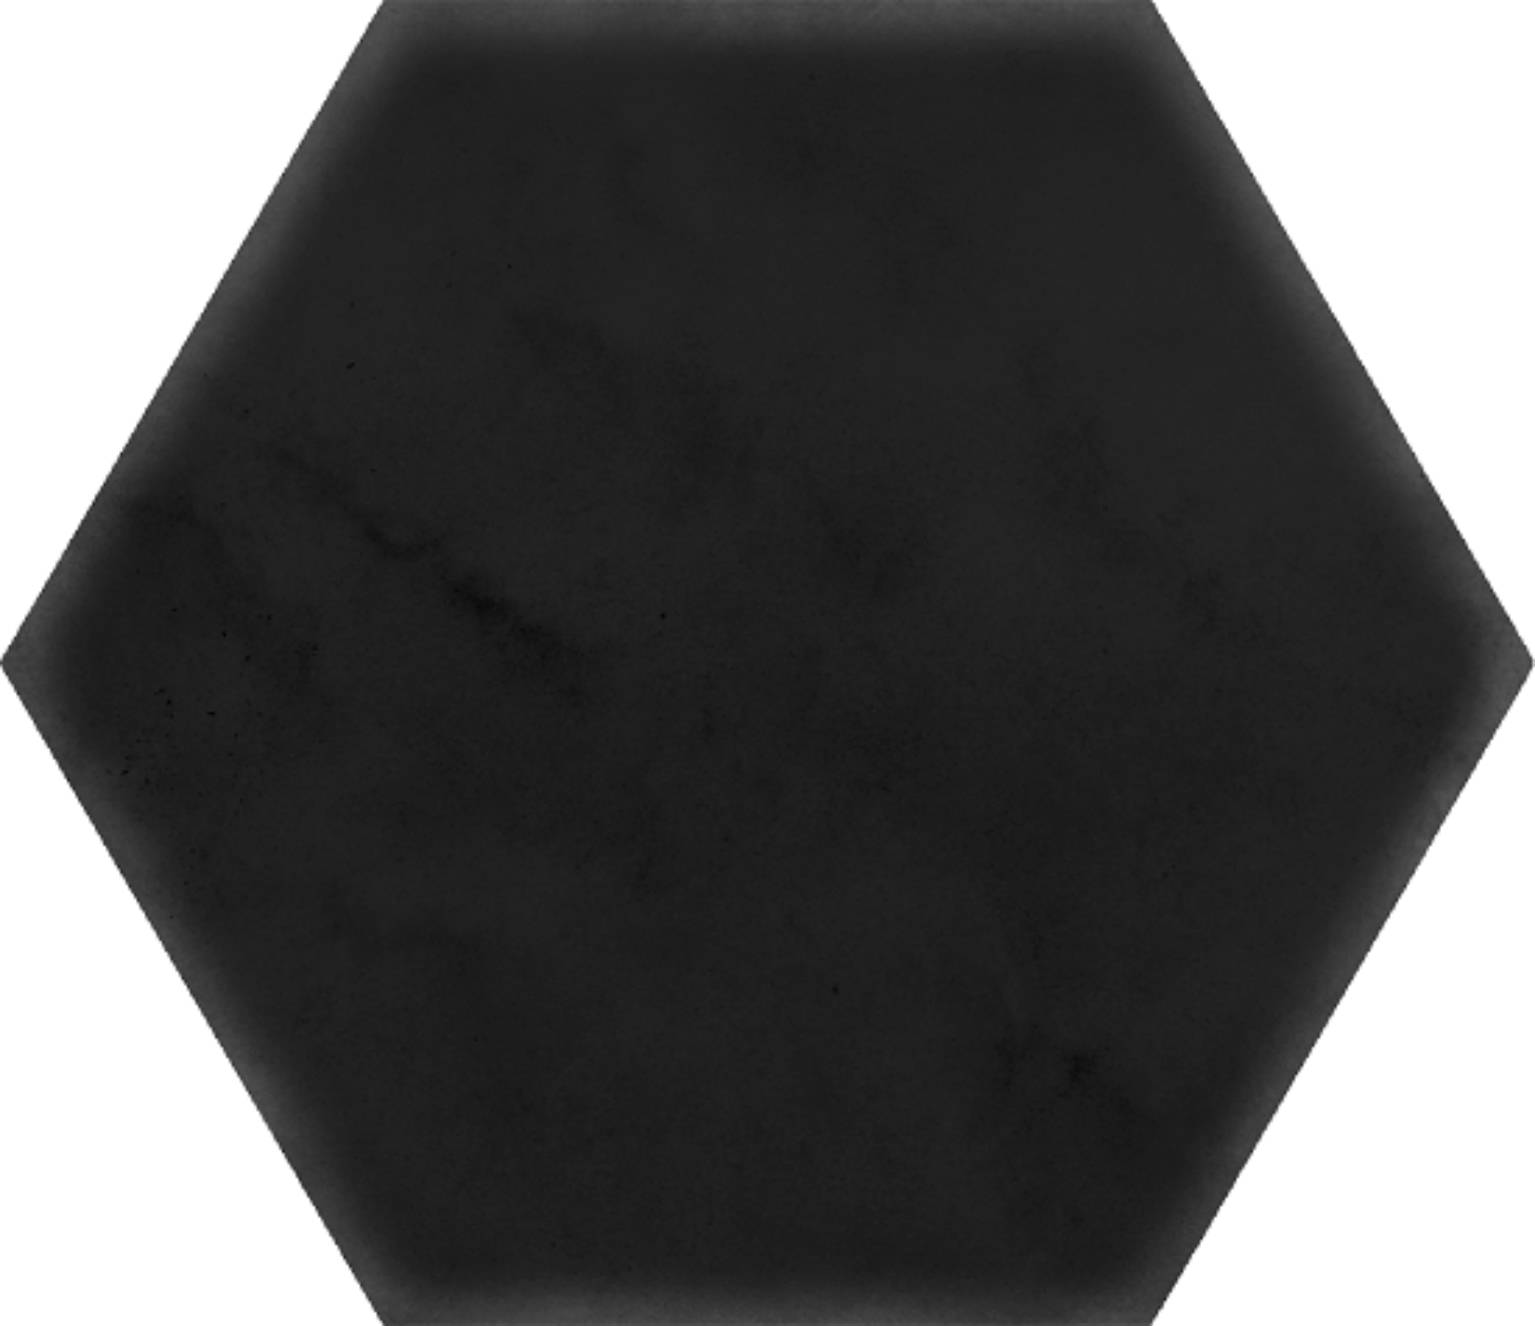 Scandinavian Black | Stones And More | Finest selection of Mosaics, Glass, Tile and Stone